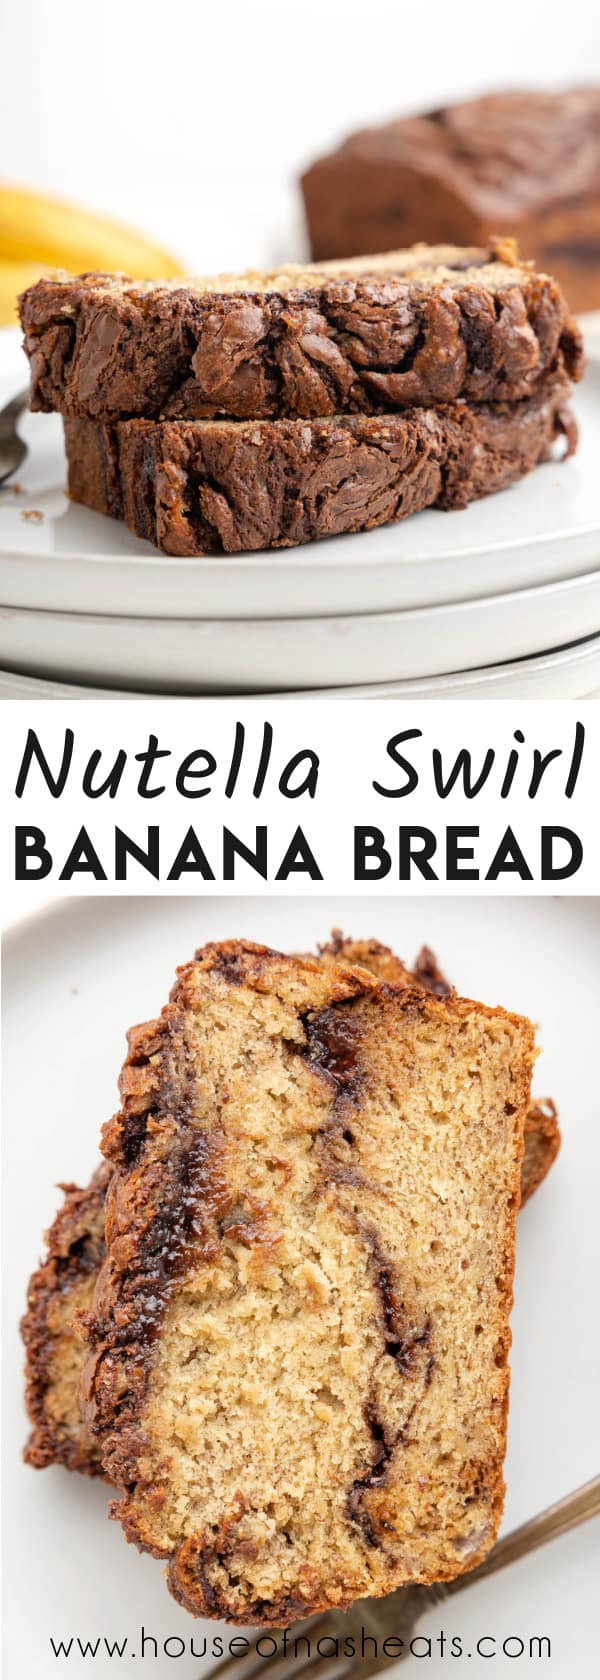 A collage of images of nutella banana bread with text overlay.